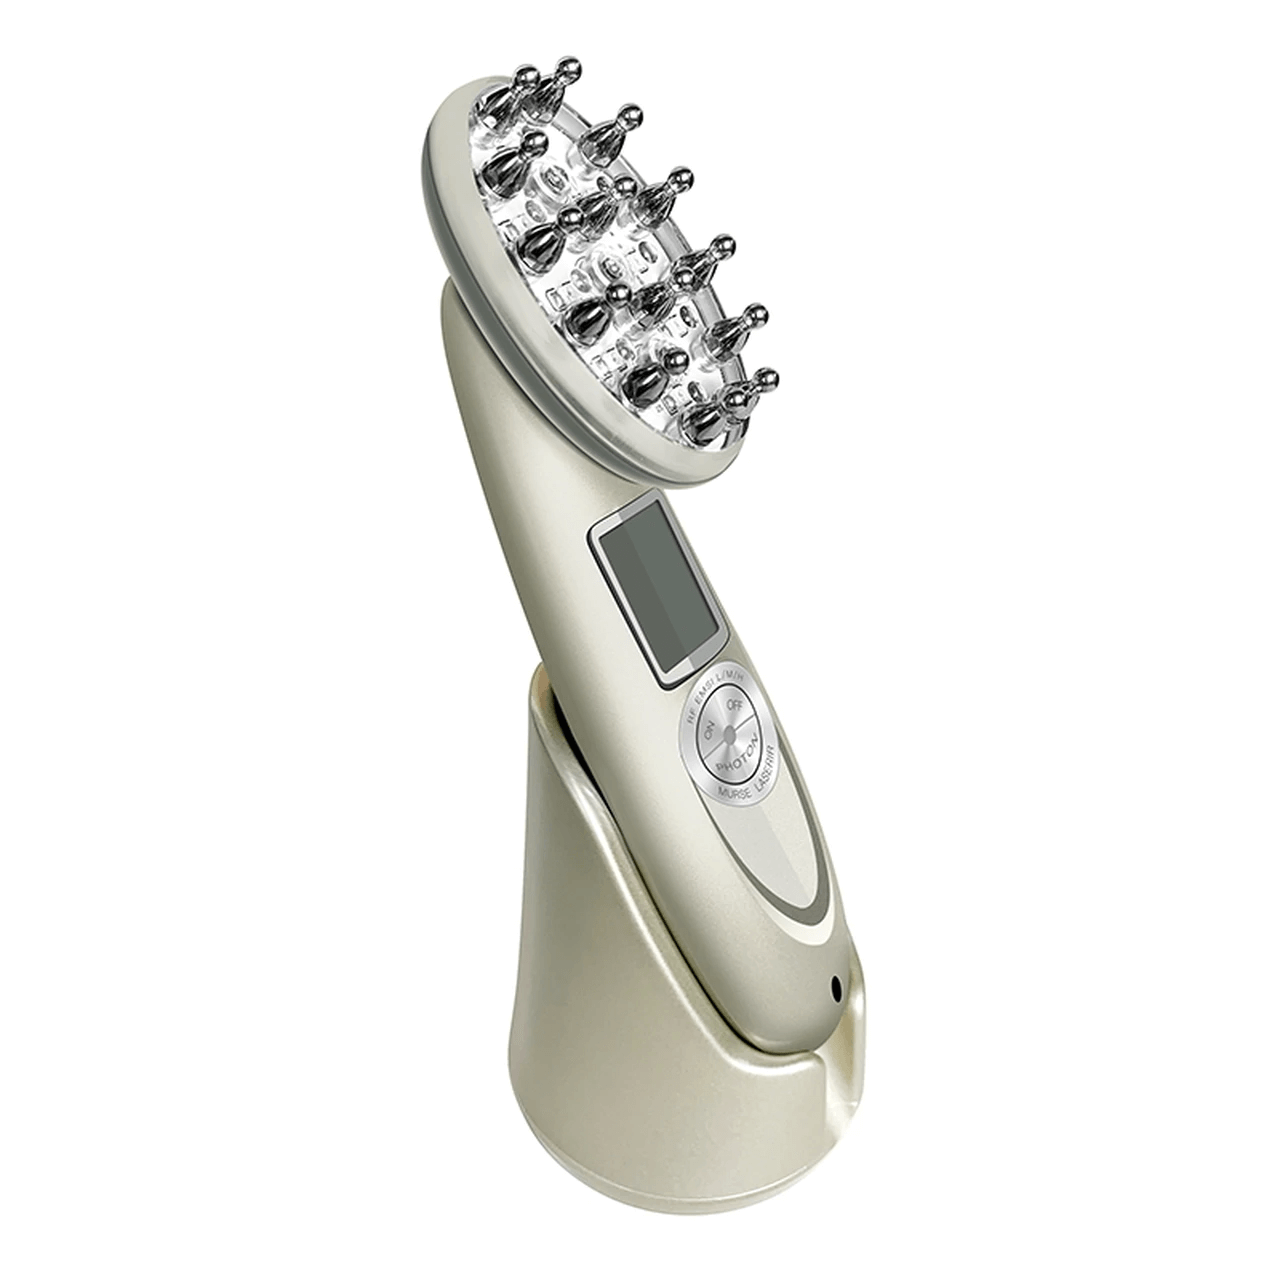 Best Laser Comb For Hair Loss Reviews